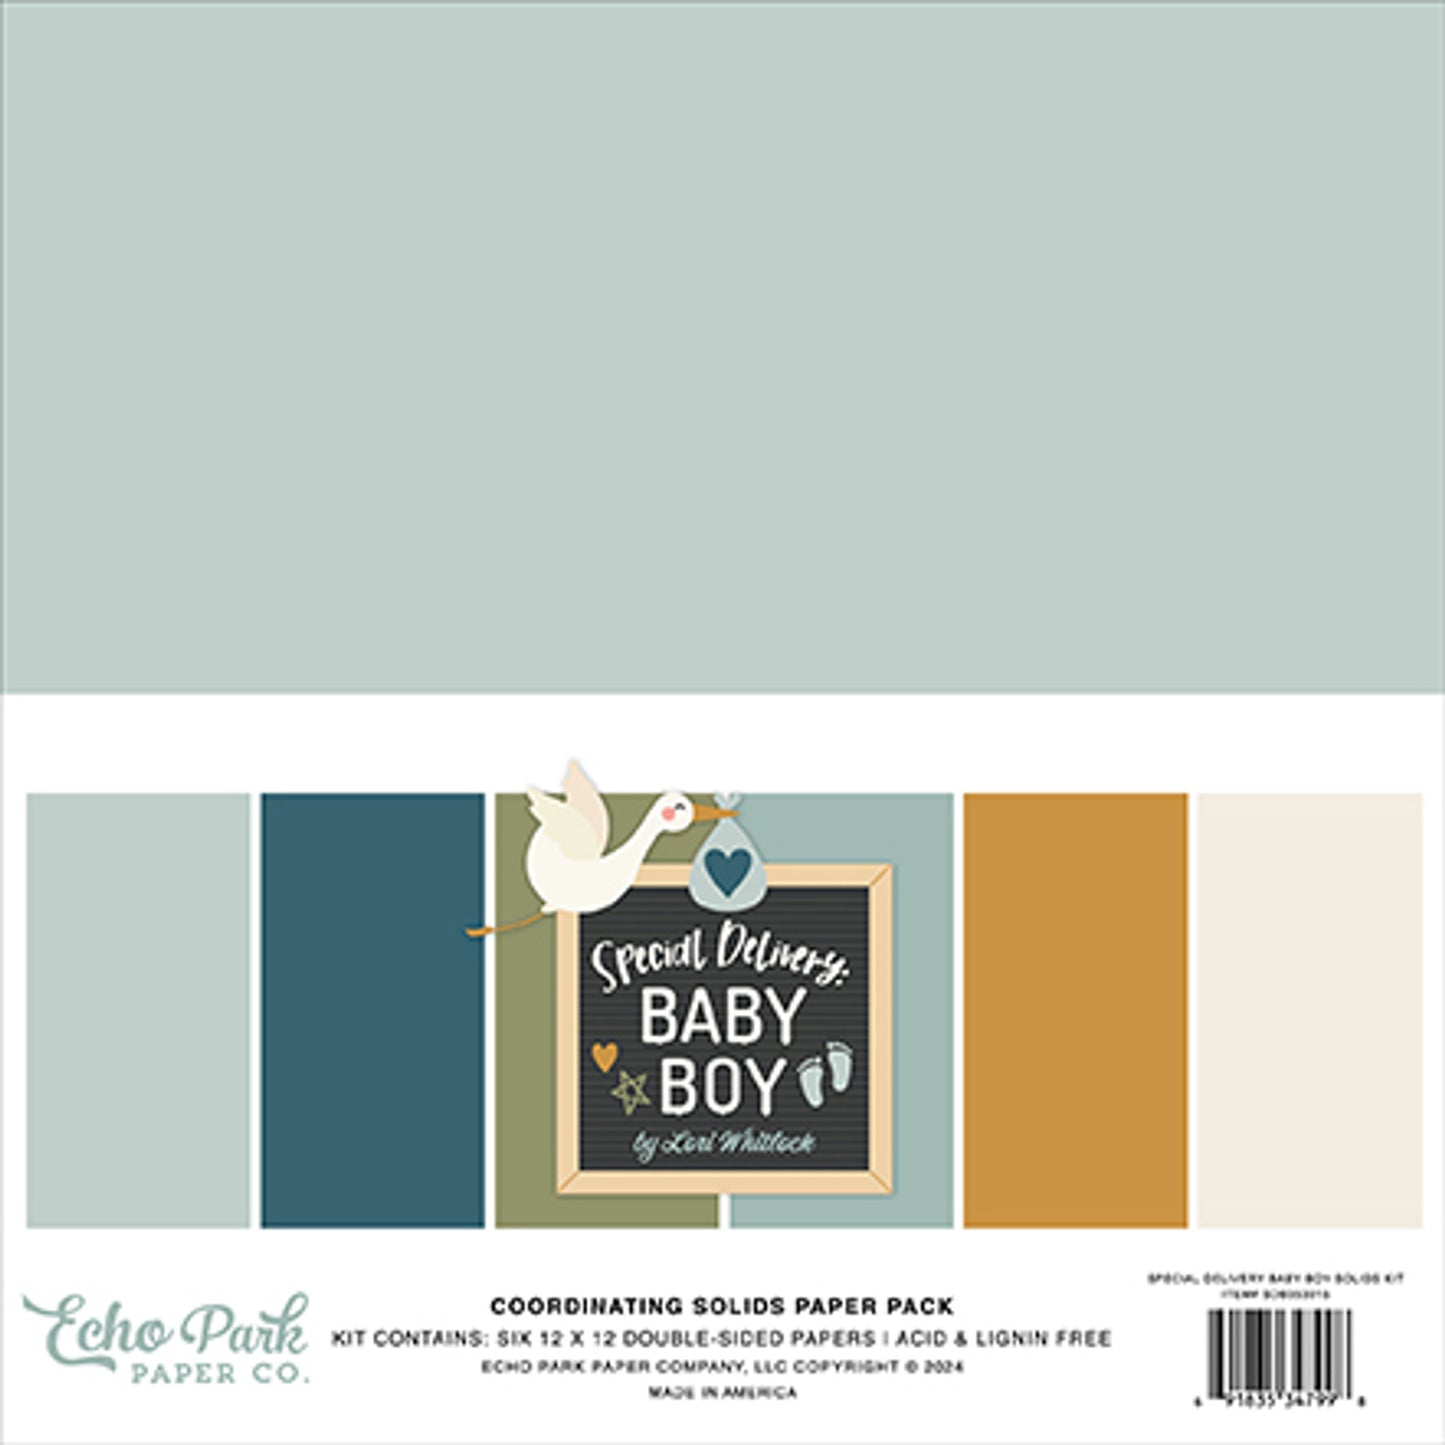 Special Delivery Baby Boy . Coordinating Solids Paper Pack